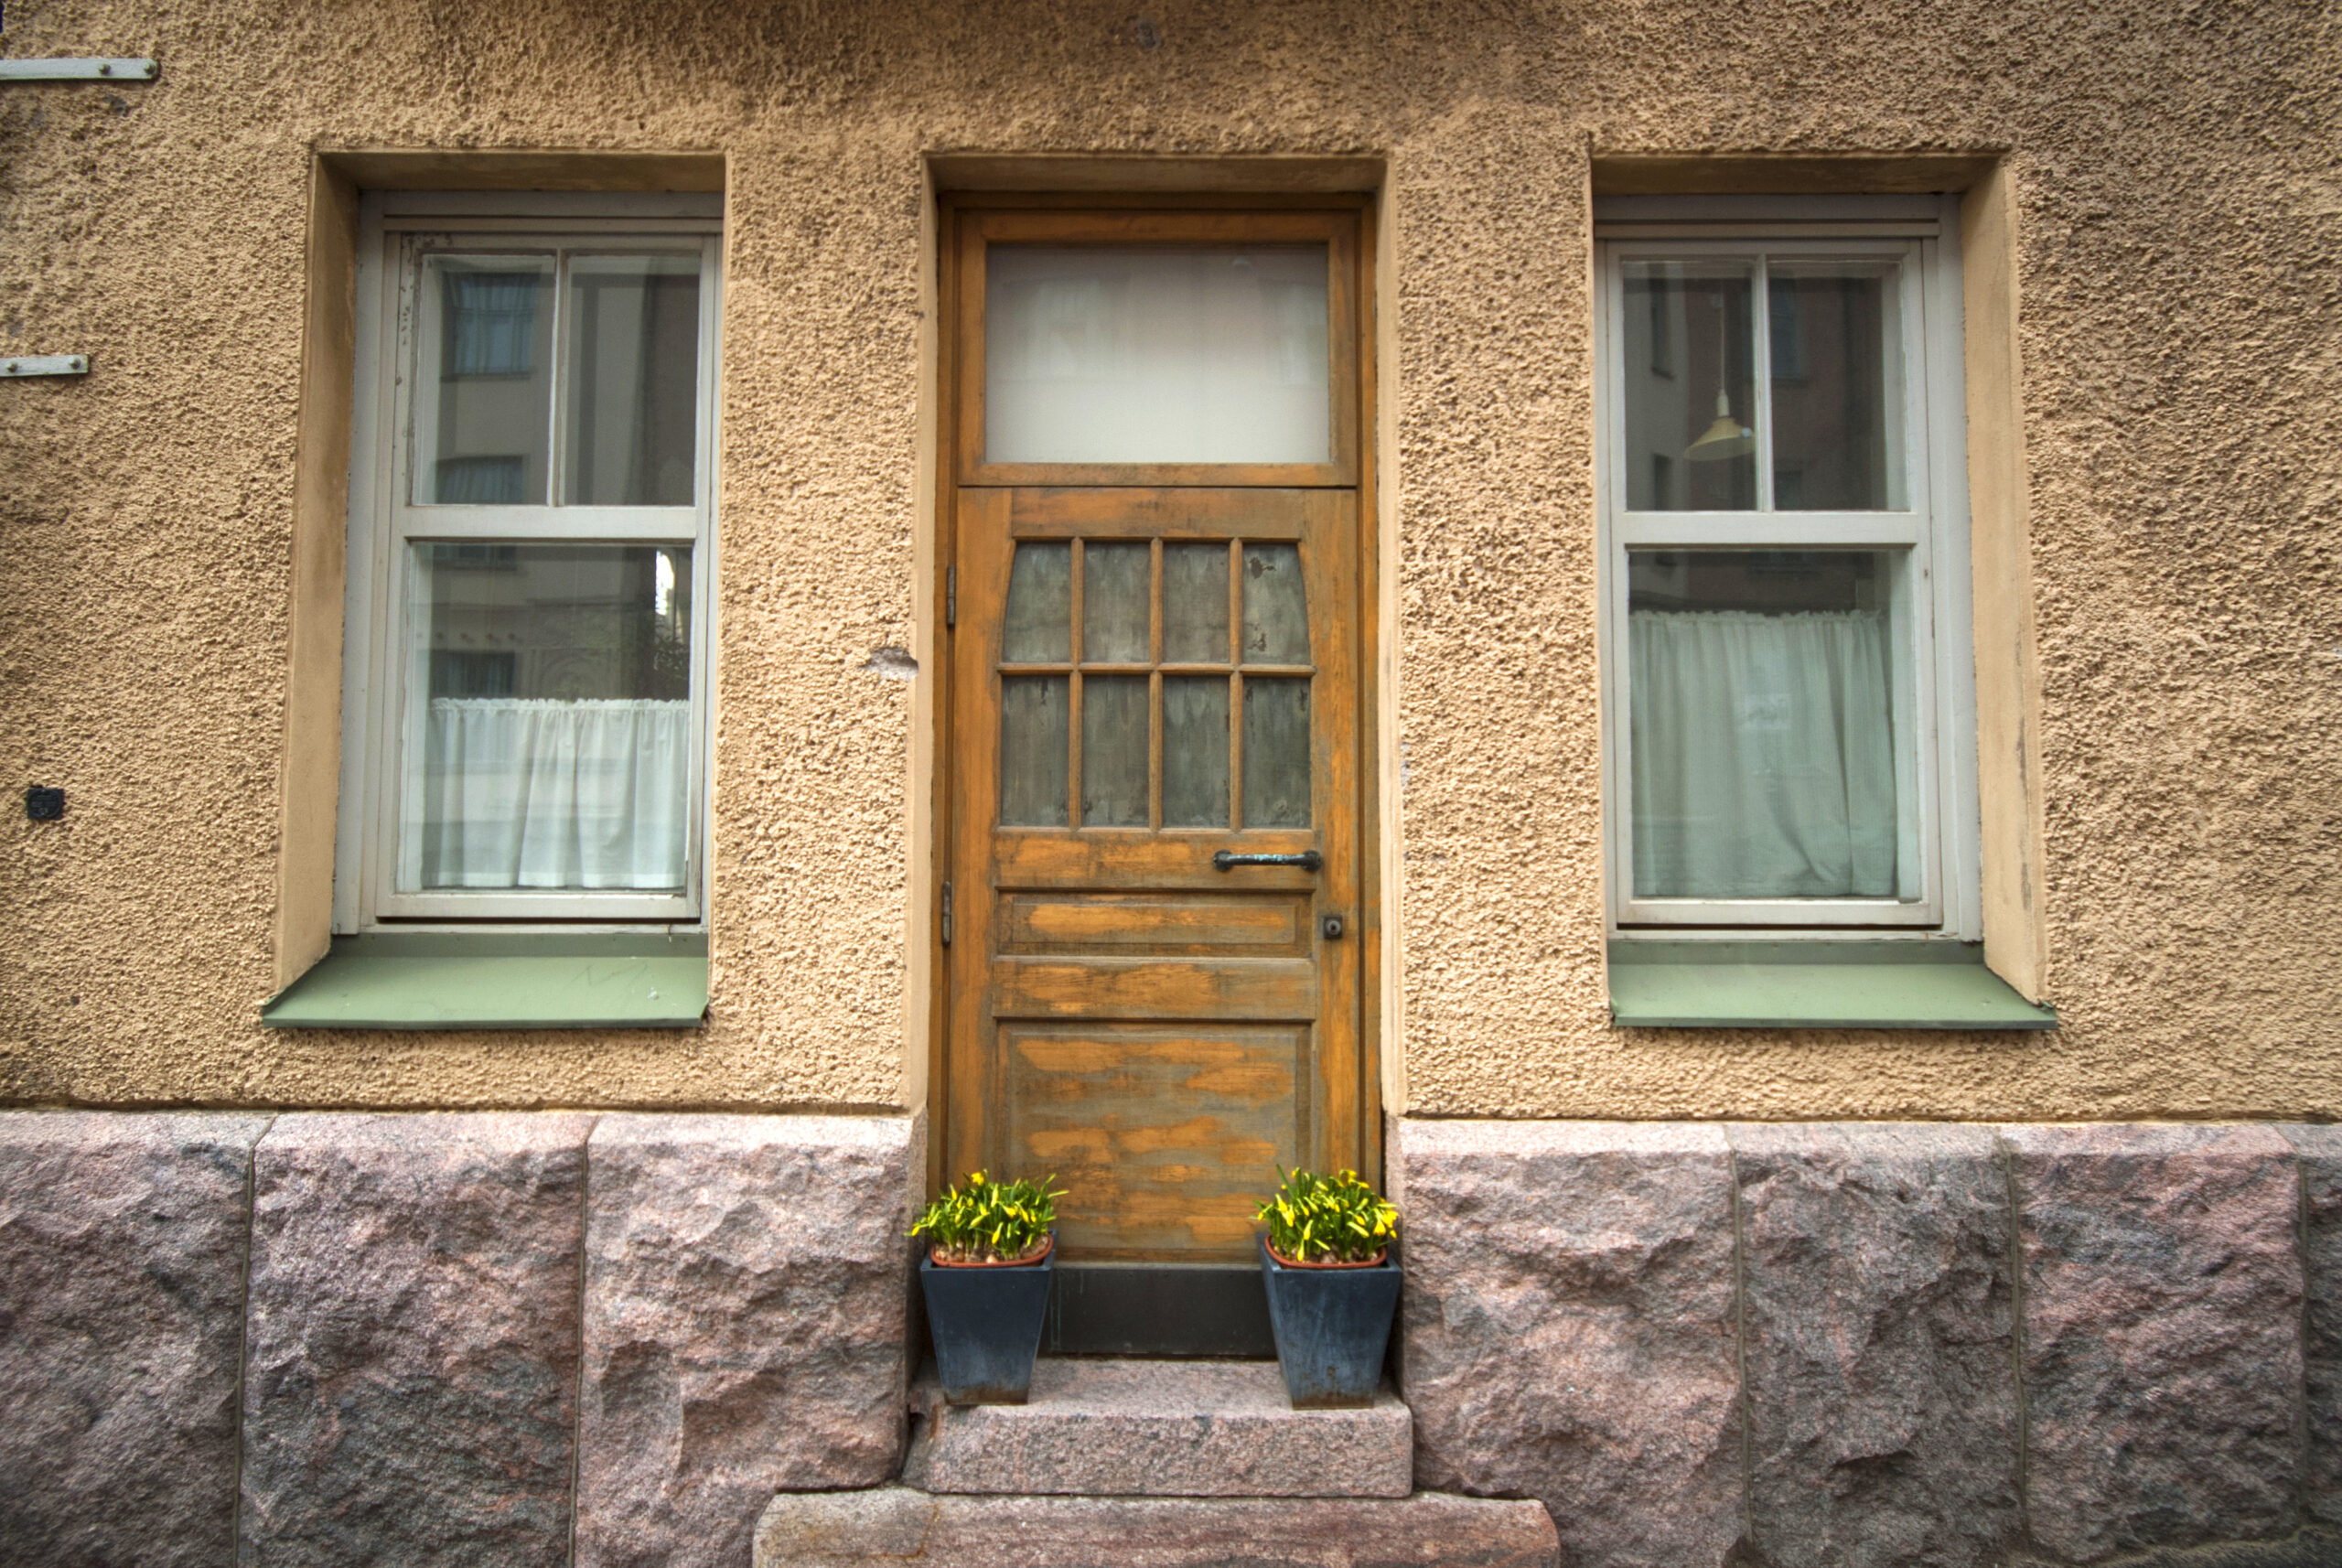 Street view of a historical building in Estonia's old town.